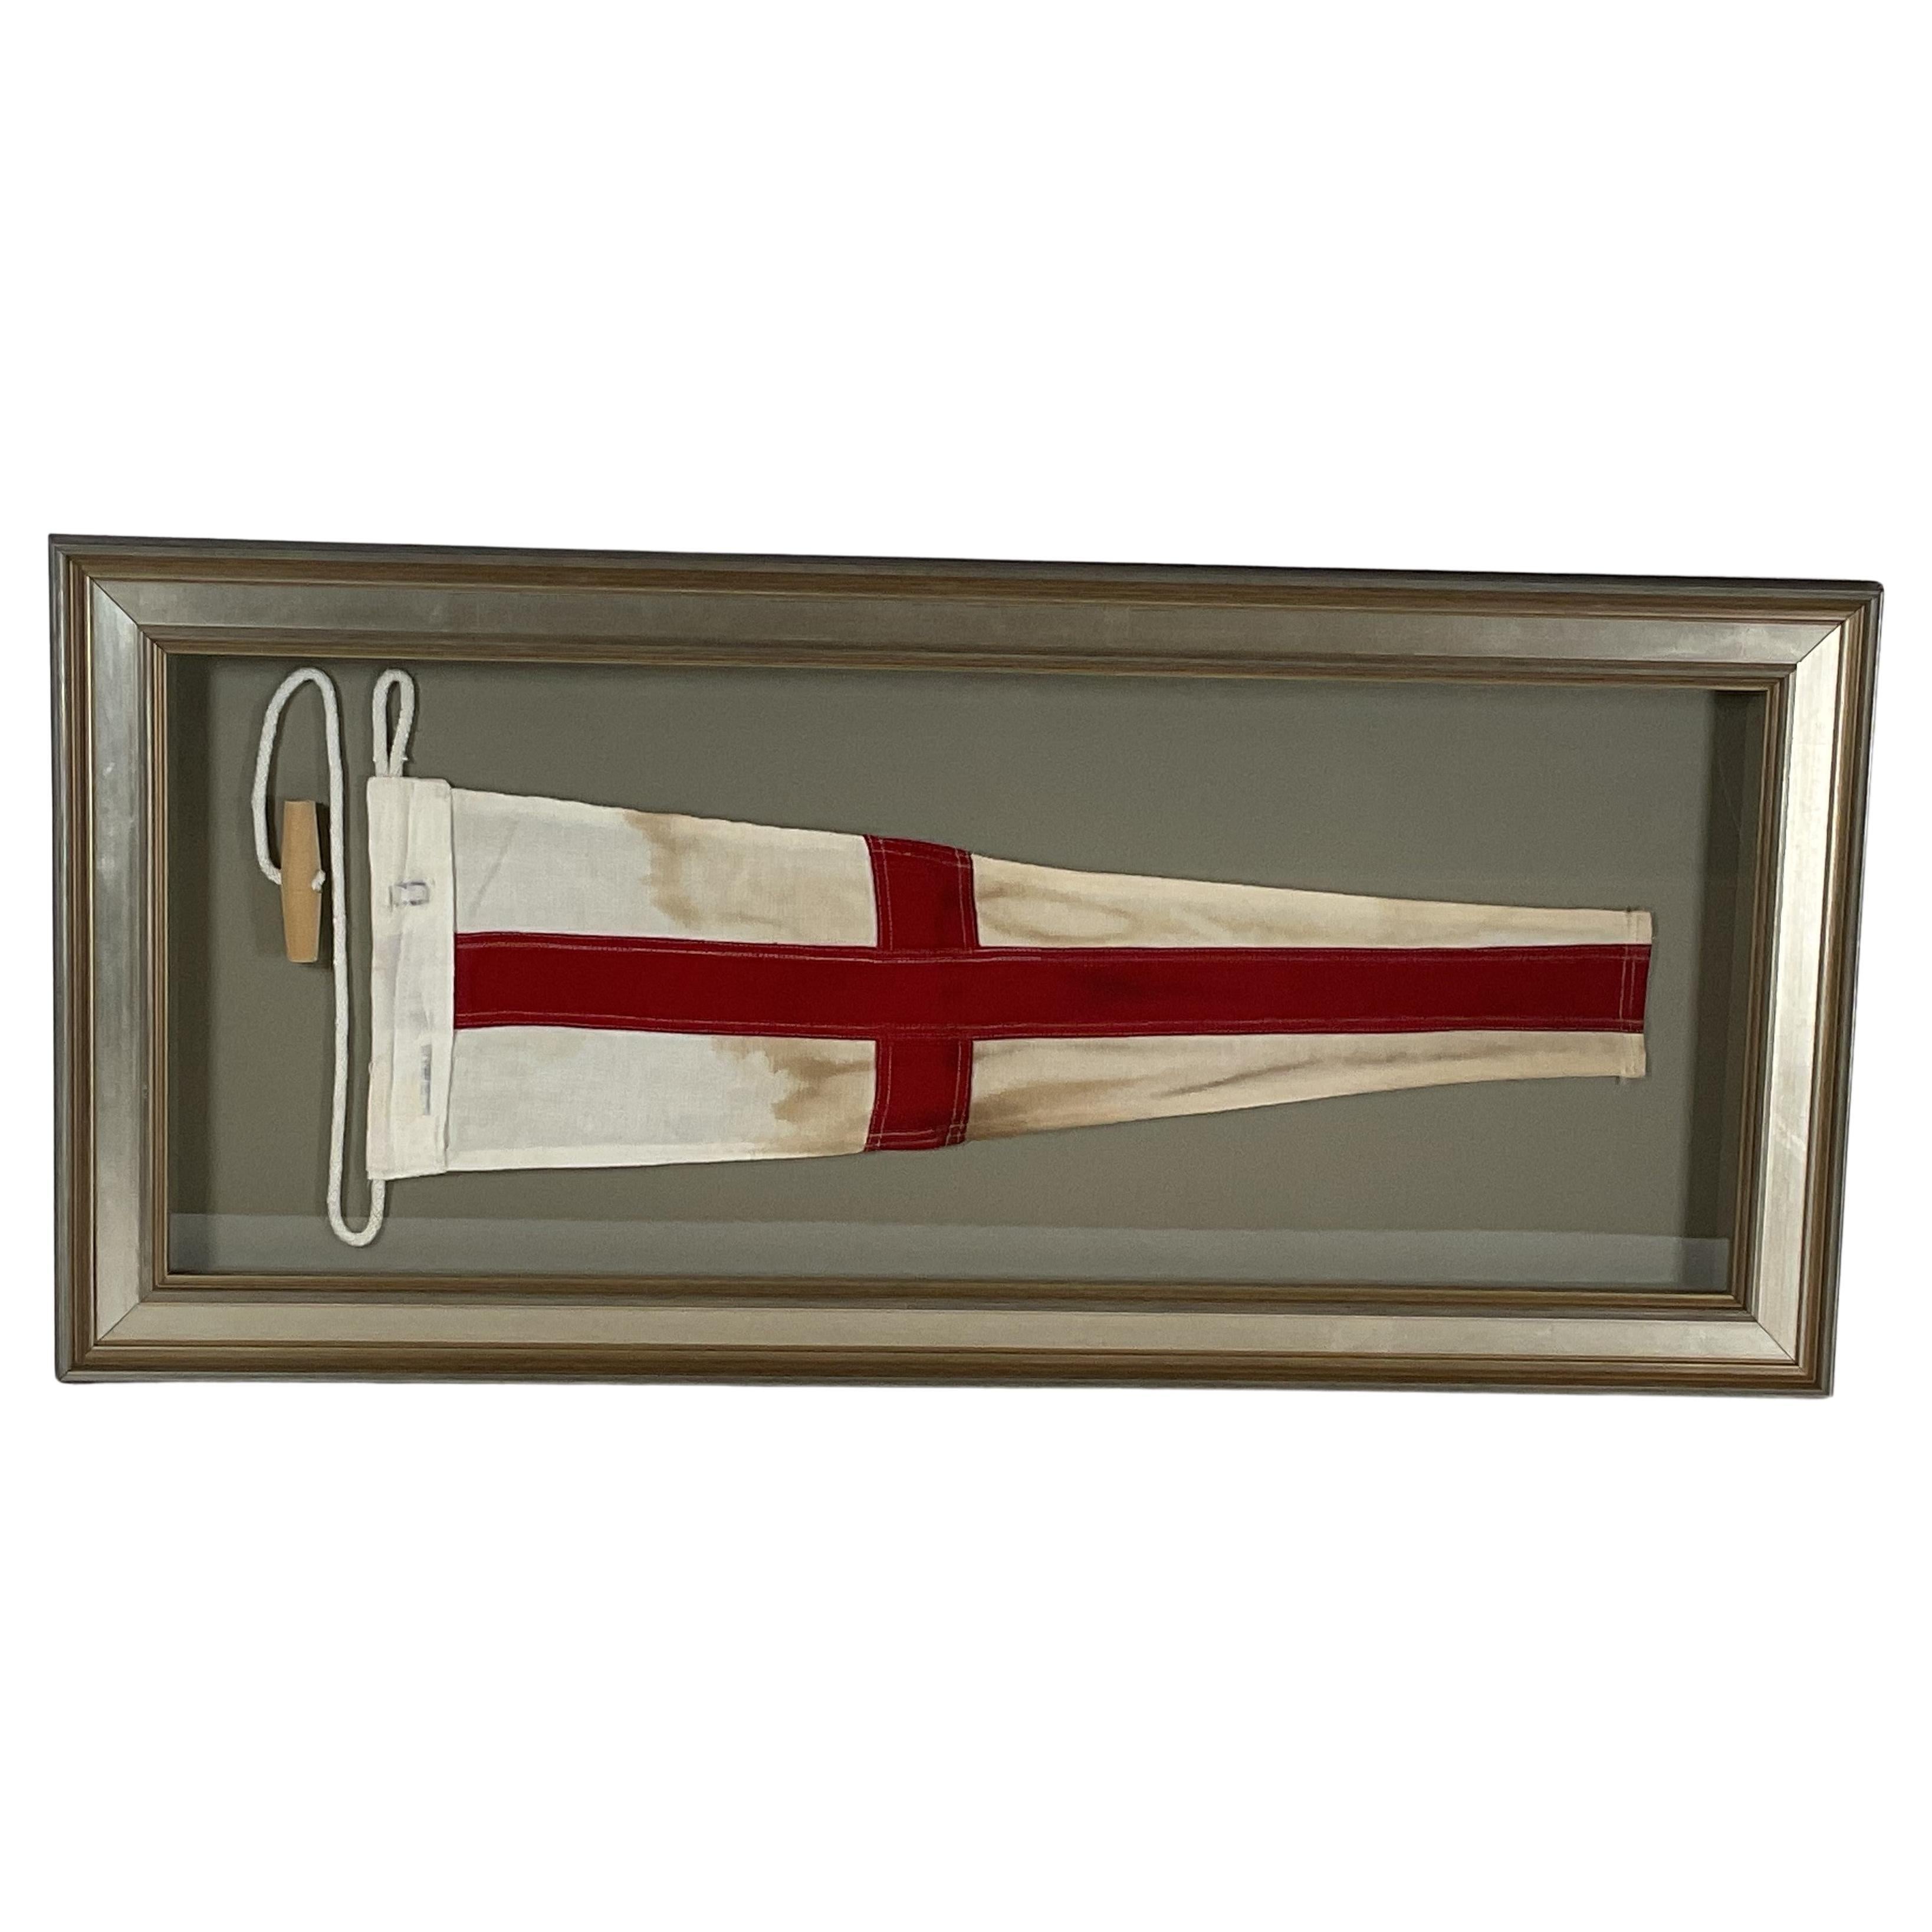 Nautical Signal Flag In Shadowbox Frame For Sale